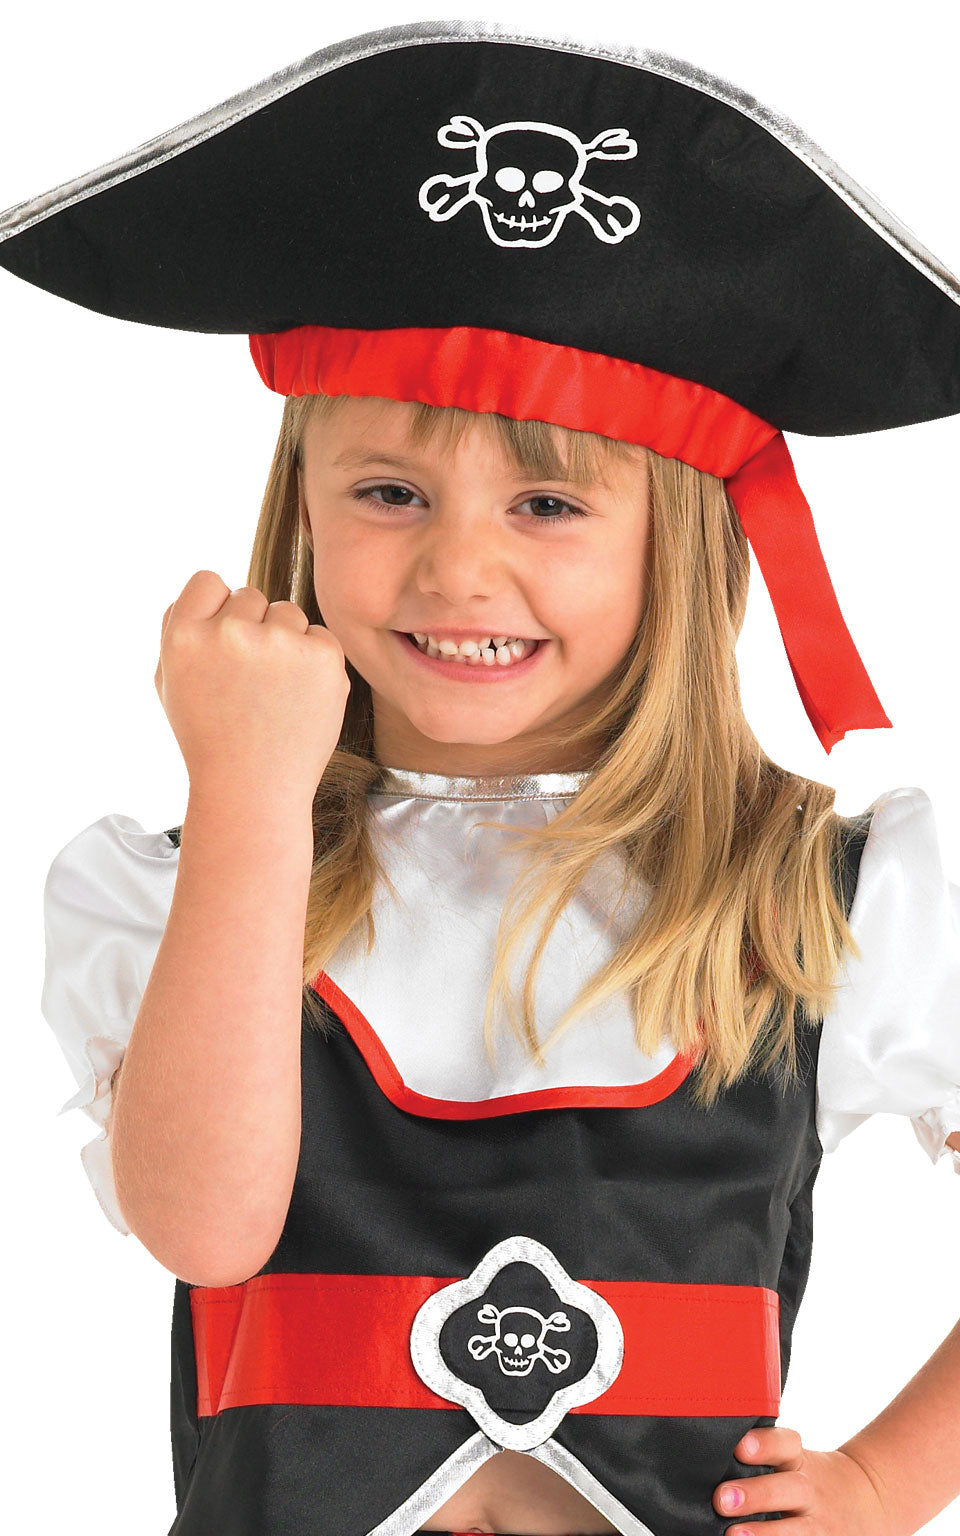 Girl Pirate Fancy Dress Costume includes top, skirt and hat